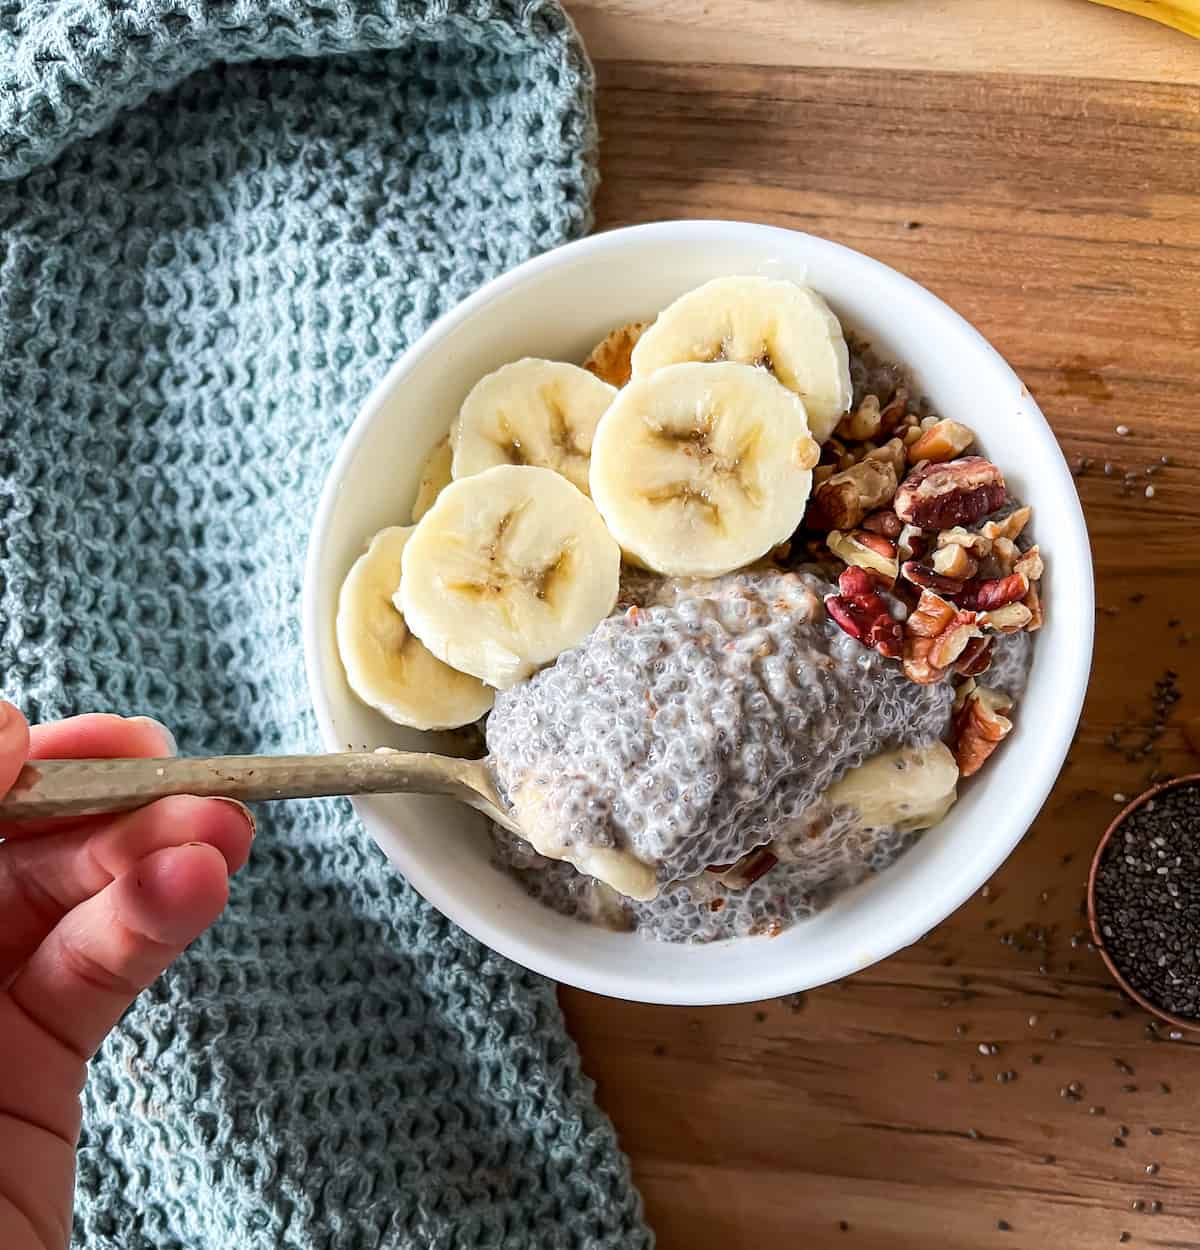 banana chia seed pudding with a hand taking a bite